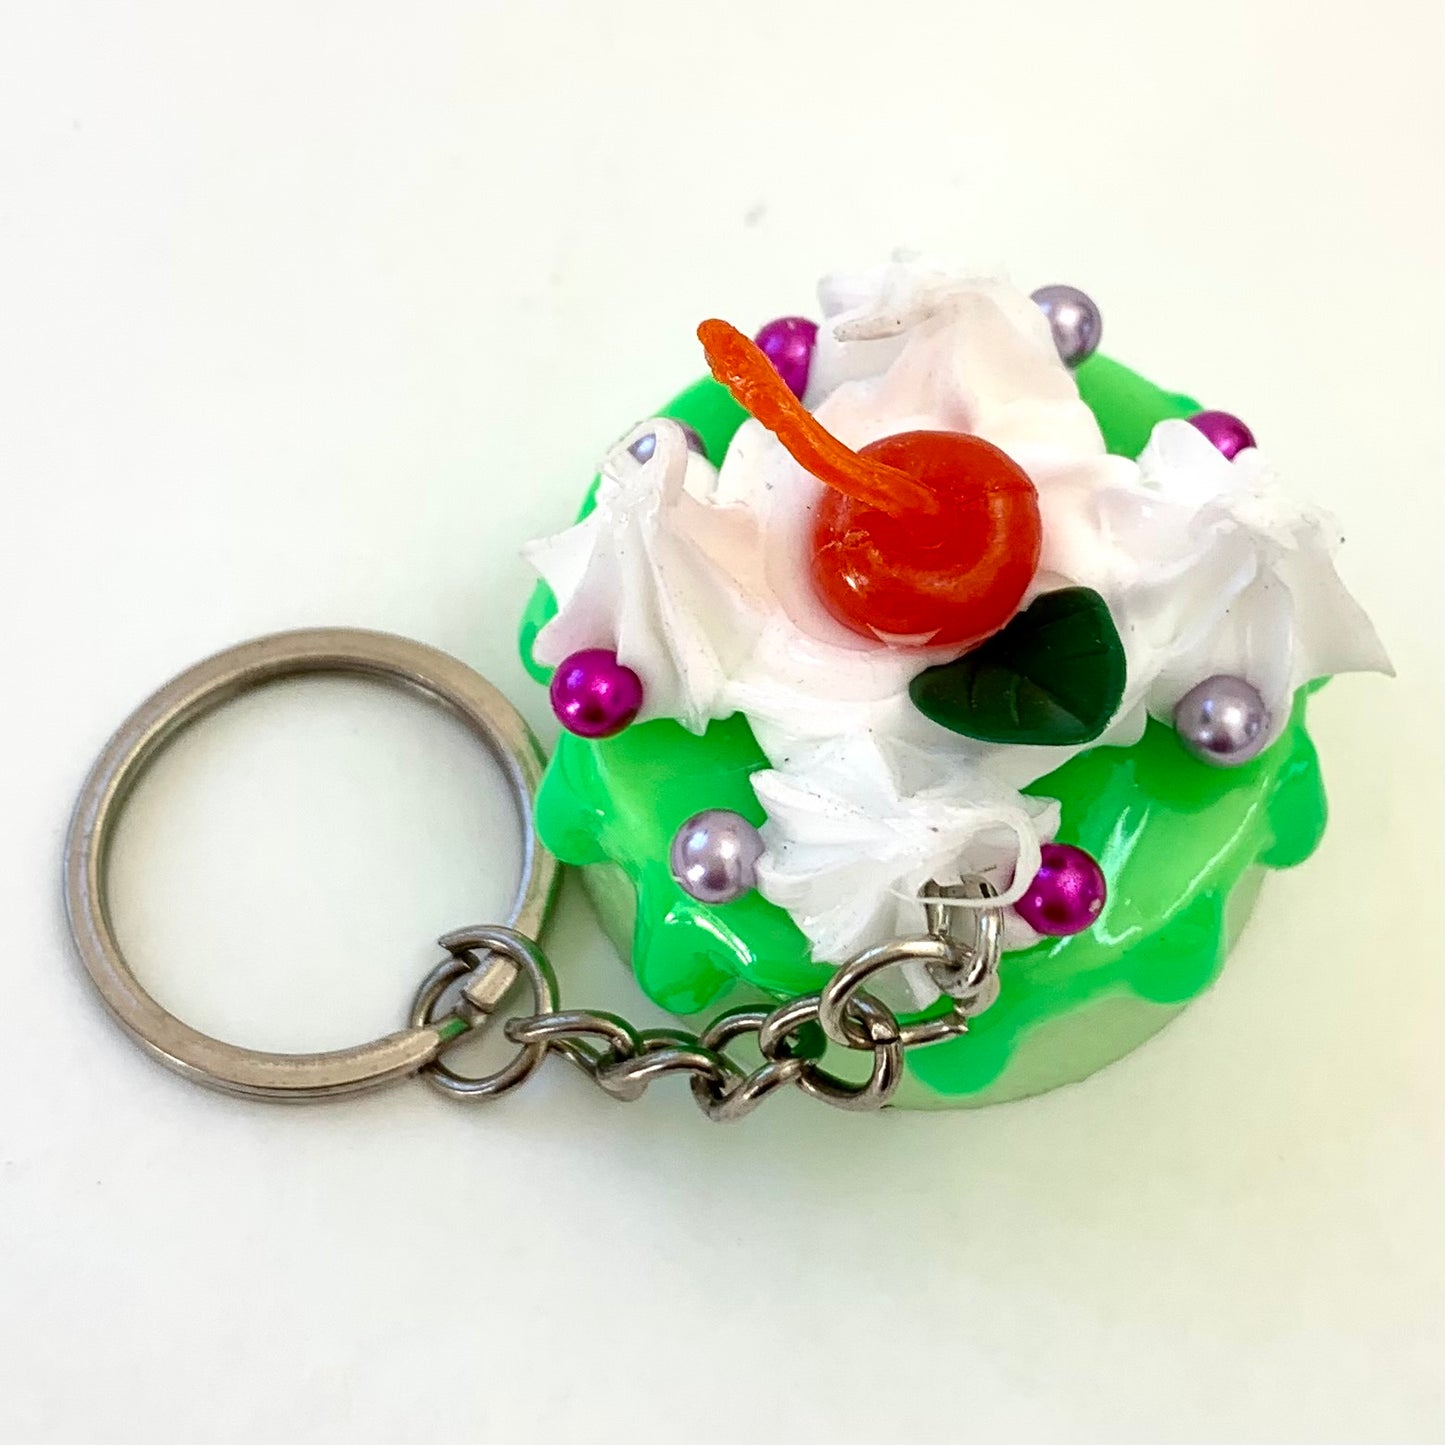 X 83040 ROUND CAKE KEYRING-DISCONTINUED